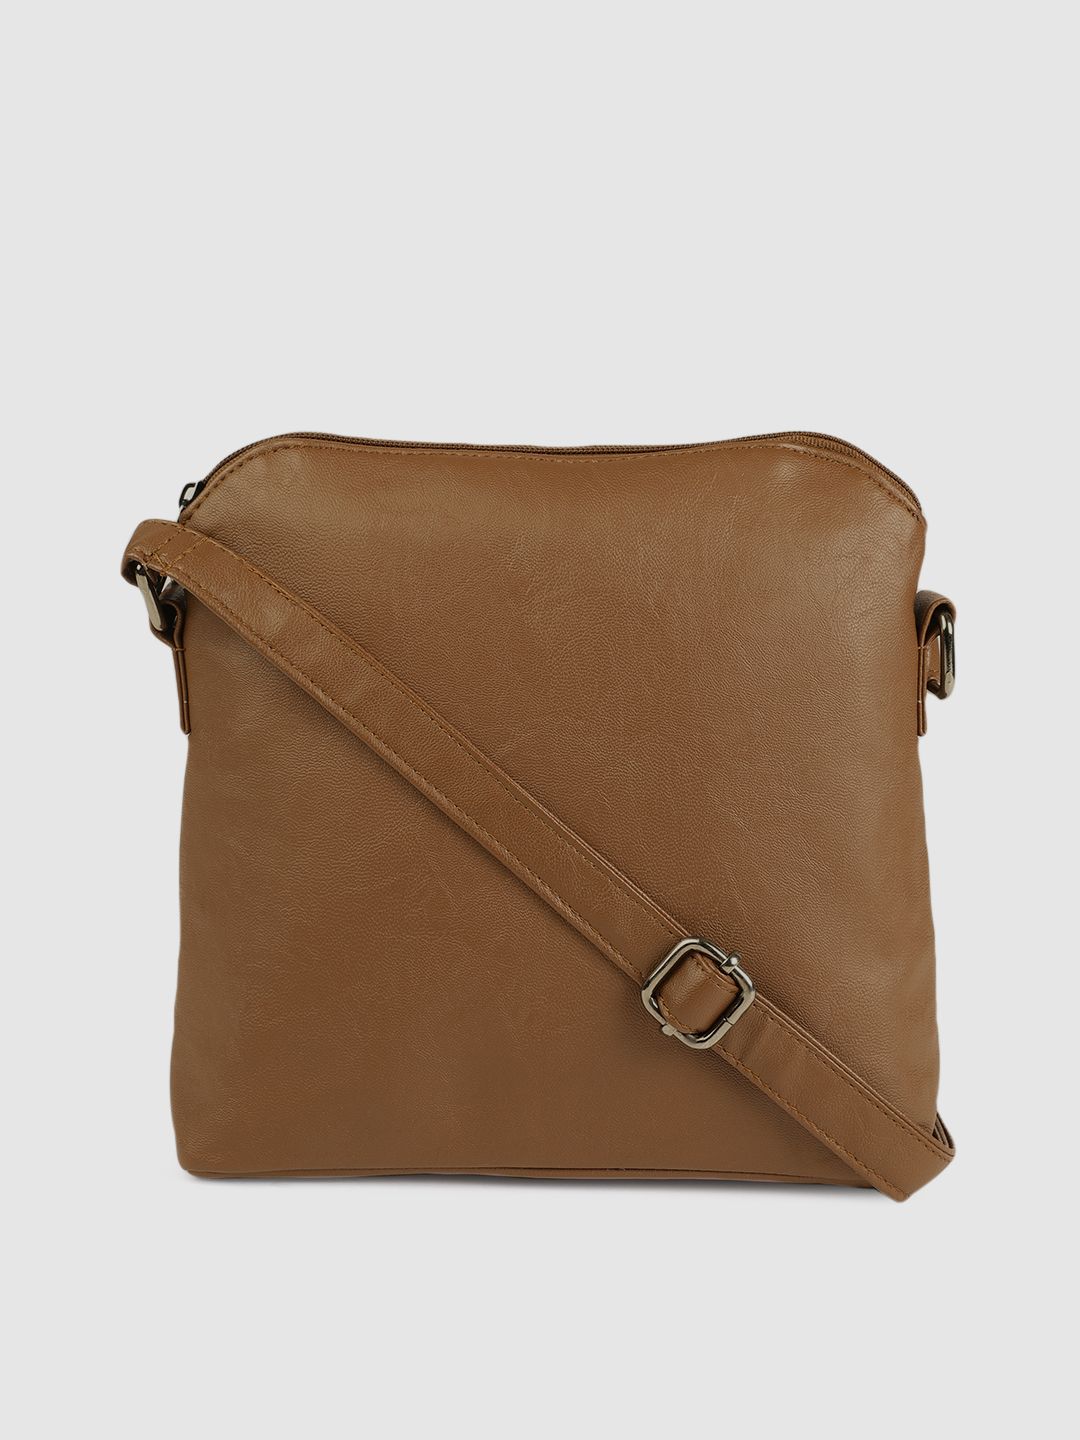 Mast & Harbour Tan Brown Solid Sling Bag Price in India